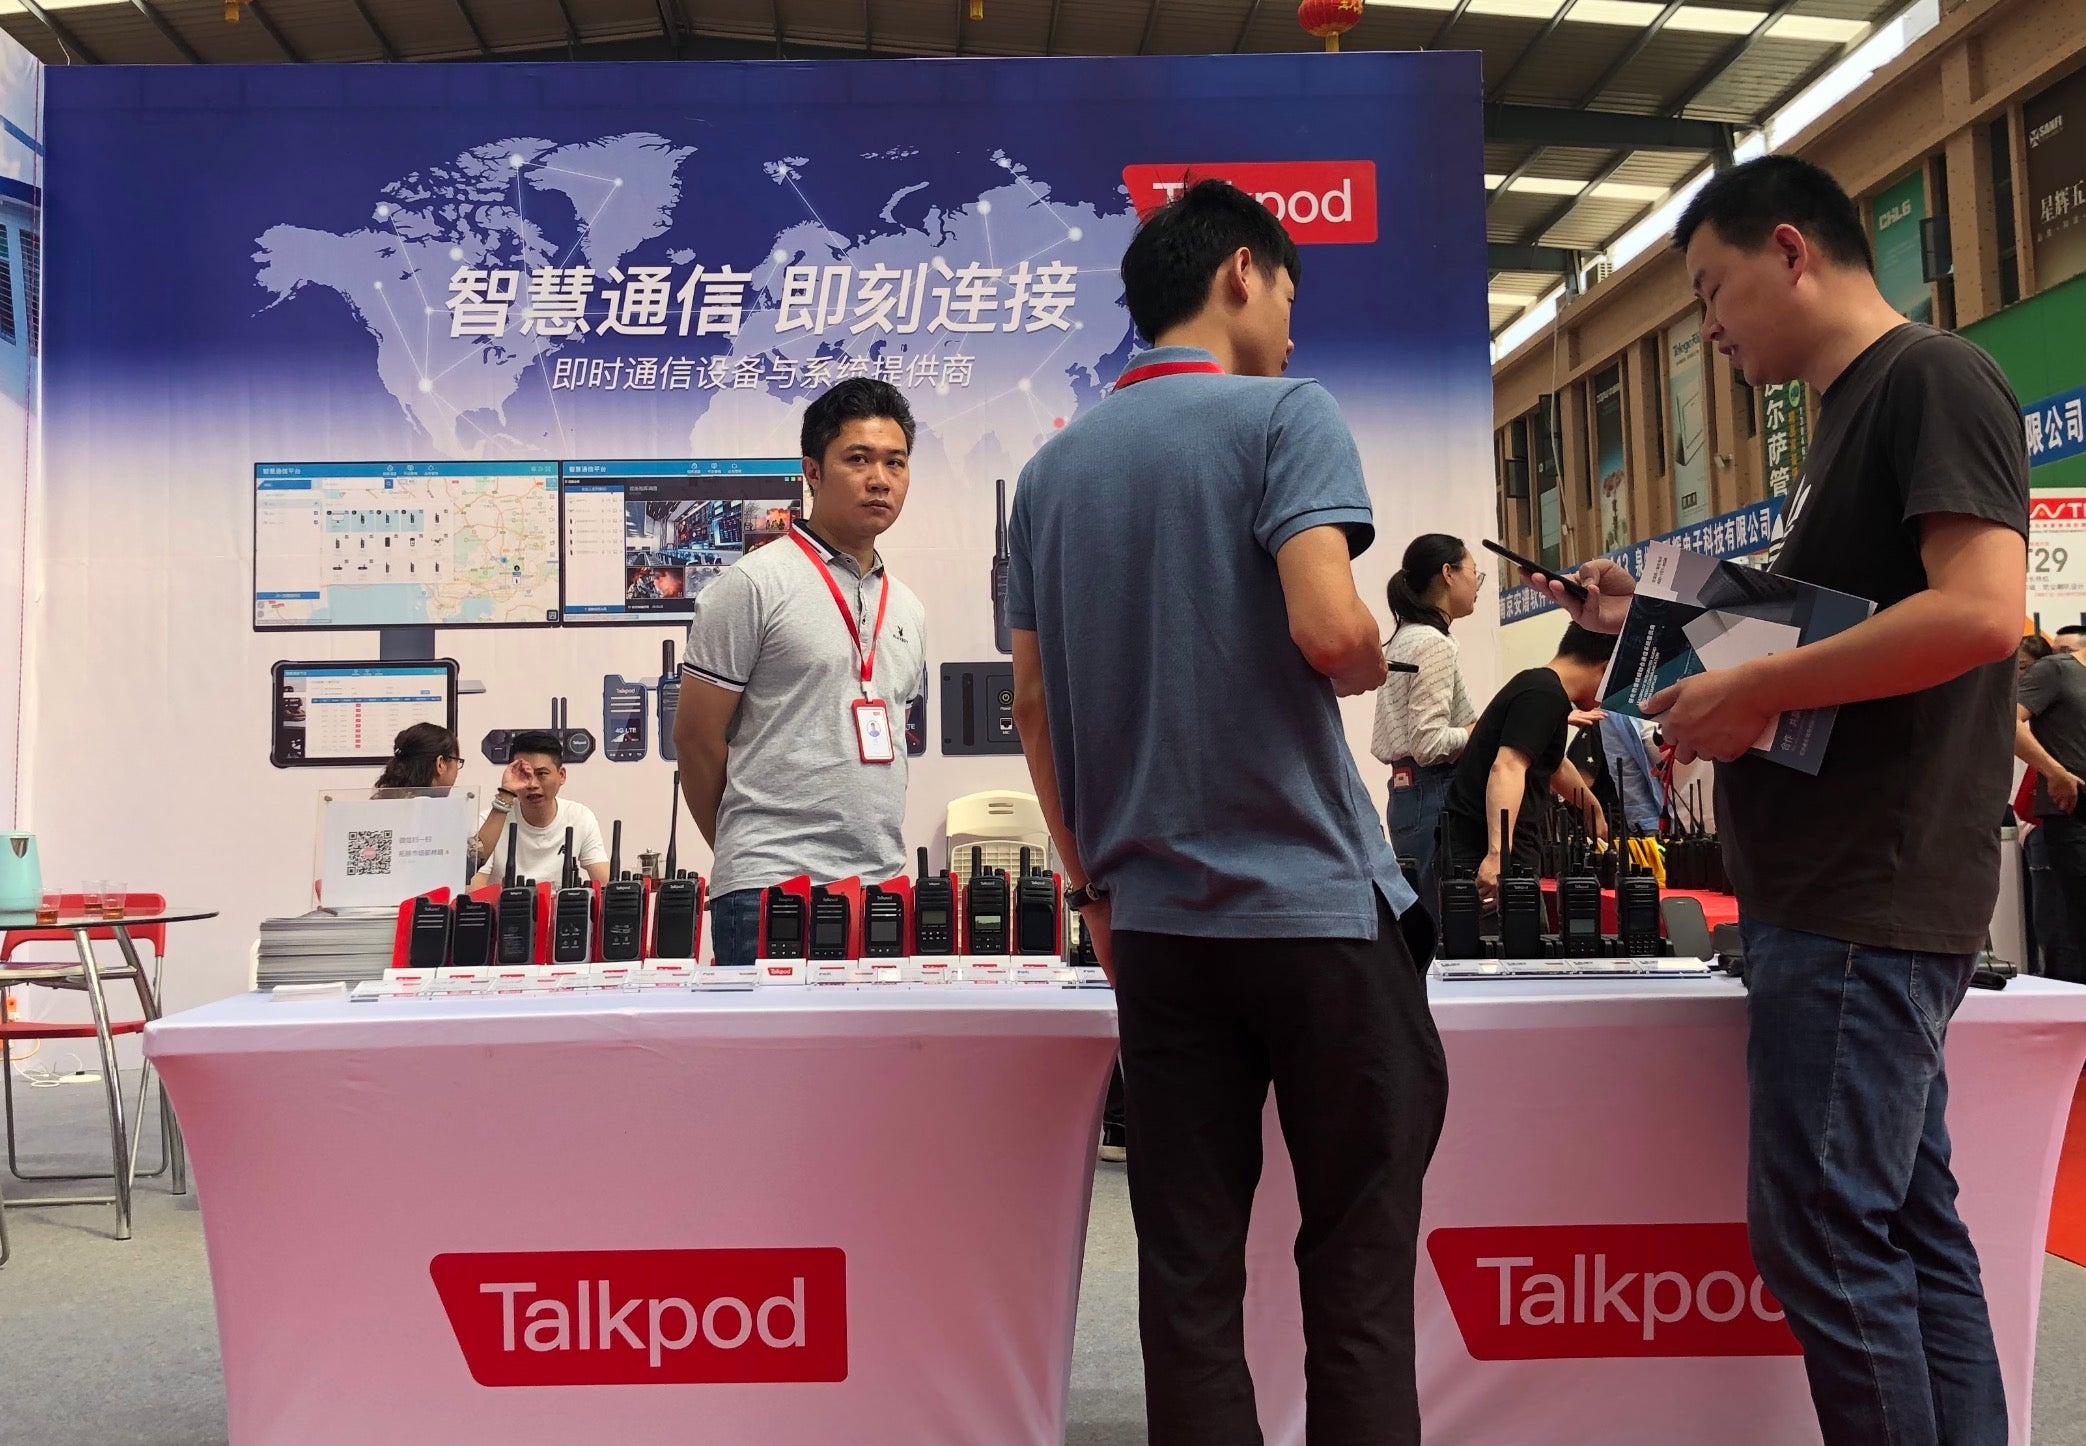 Talkpod Introduces A30P with Built-in Encryption-Breaking Frequencies at Quanzhou Intercom Industry Expo 2021